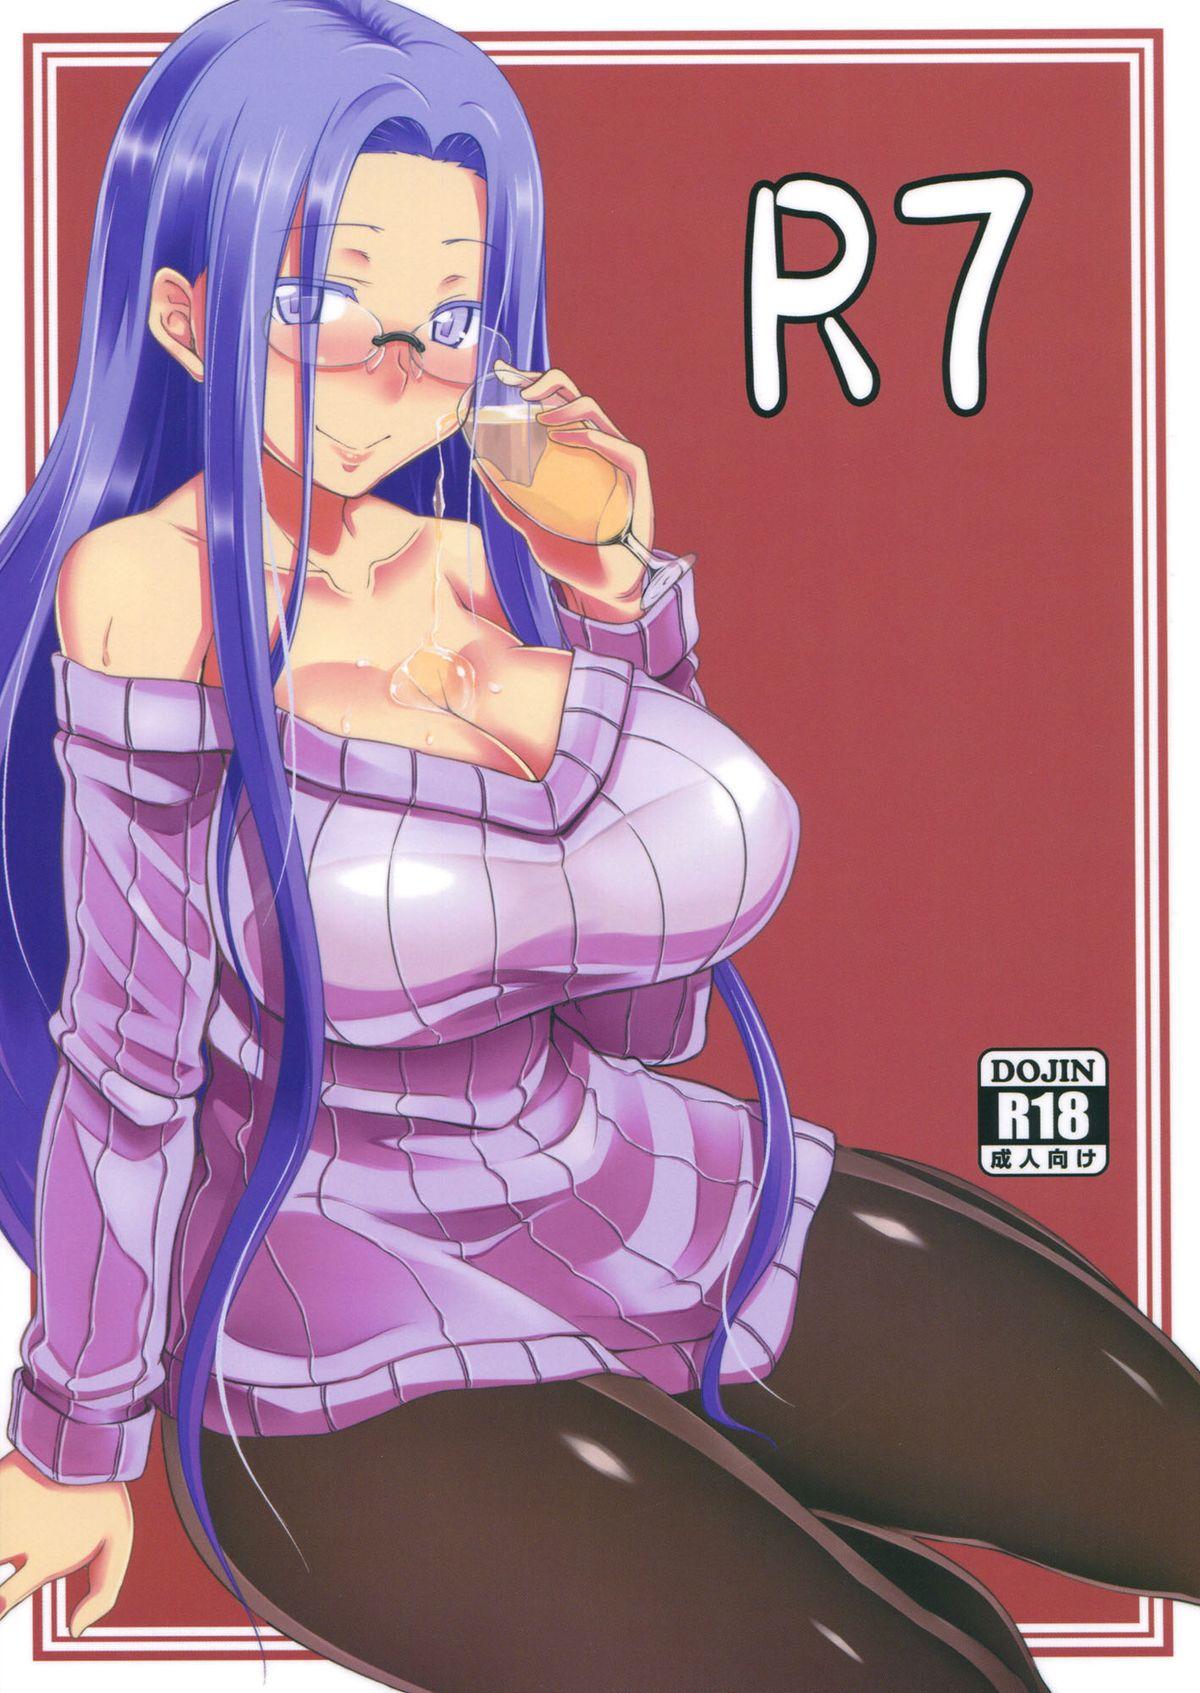 Ngentot R7 - Fate stay night Fate hollow ataraxia Piss - Picture 1